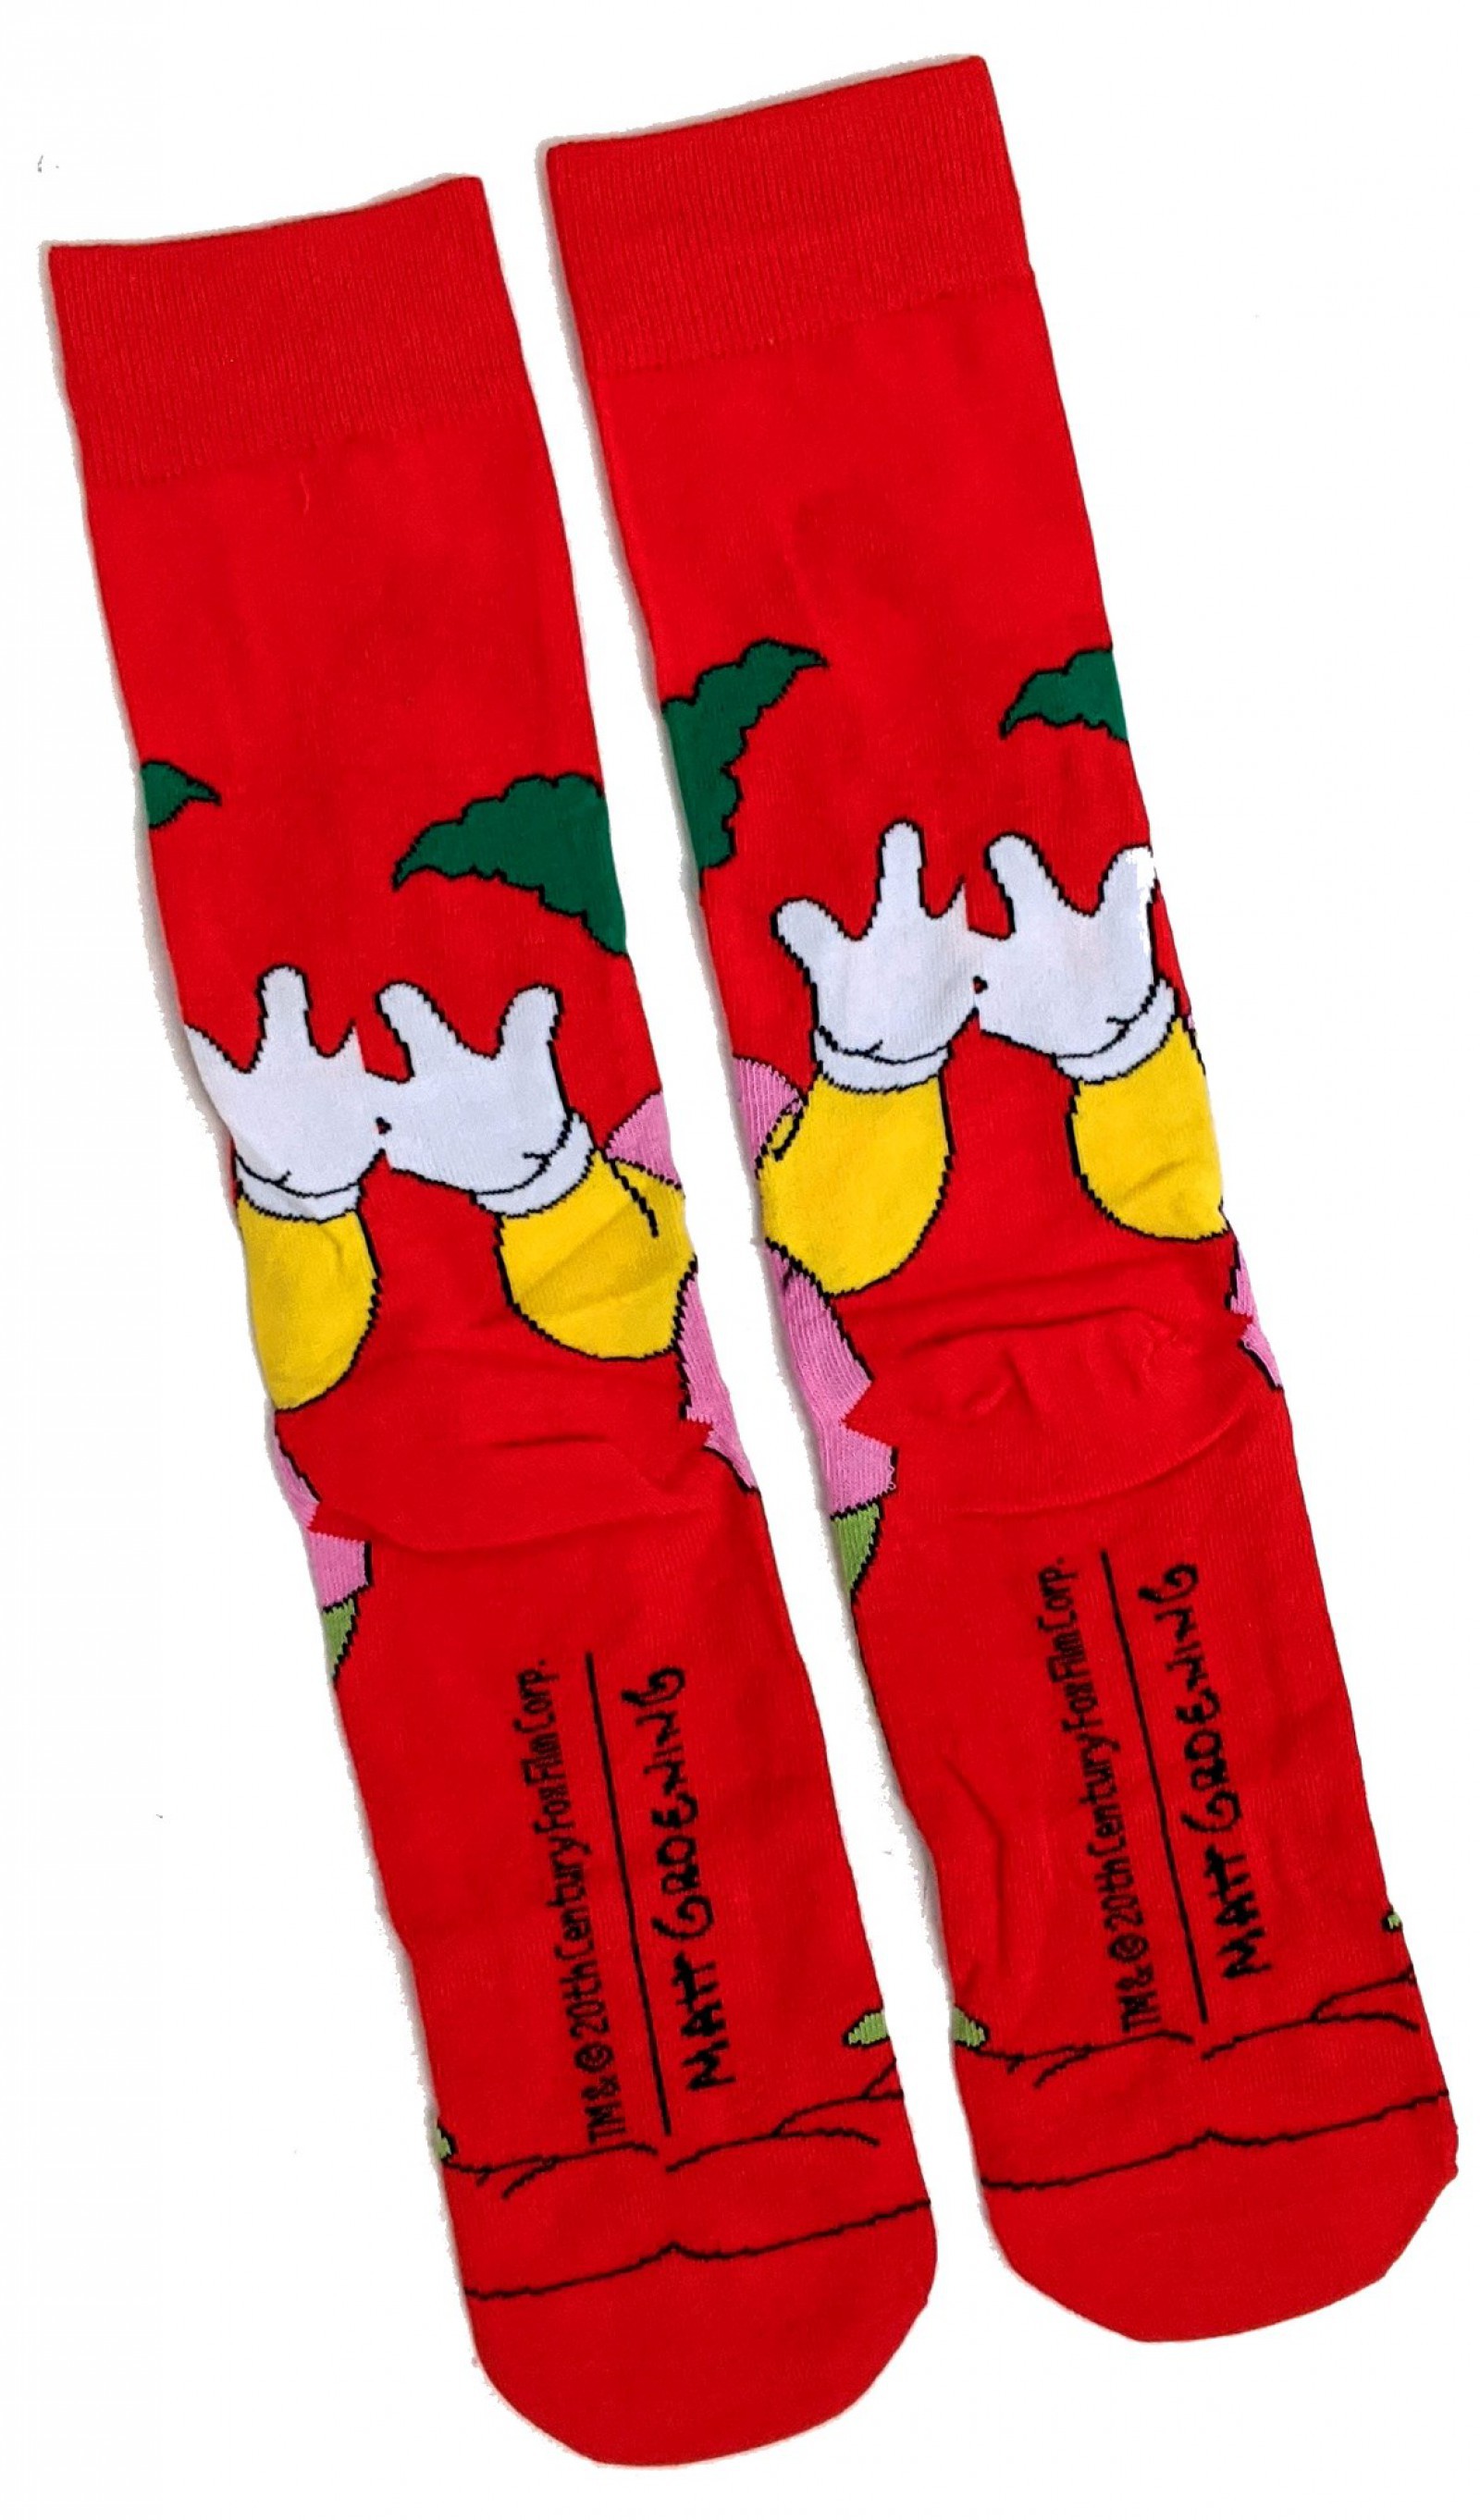 One Size UK 6-11 2 Pairs Simpsons Krusty the Clown Assorted Crew Socks 